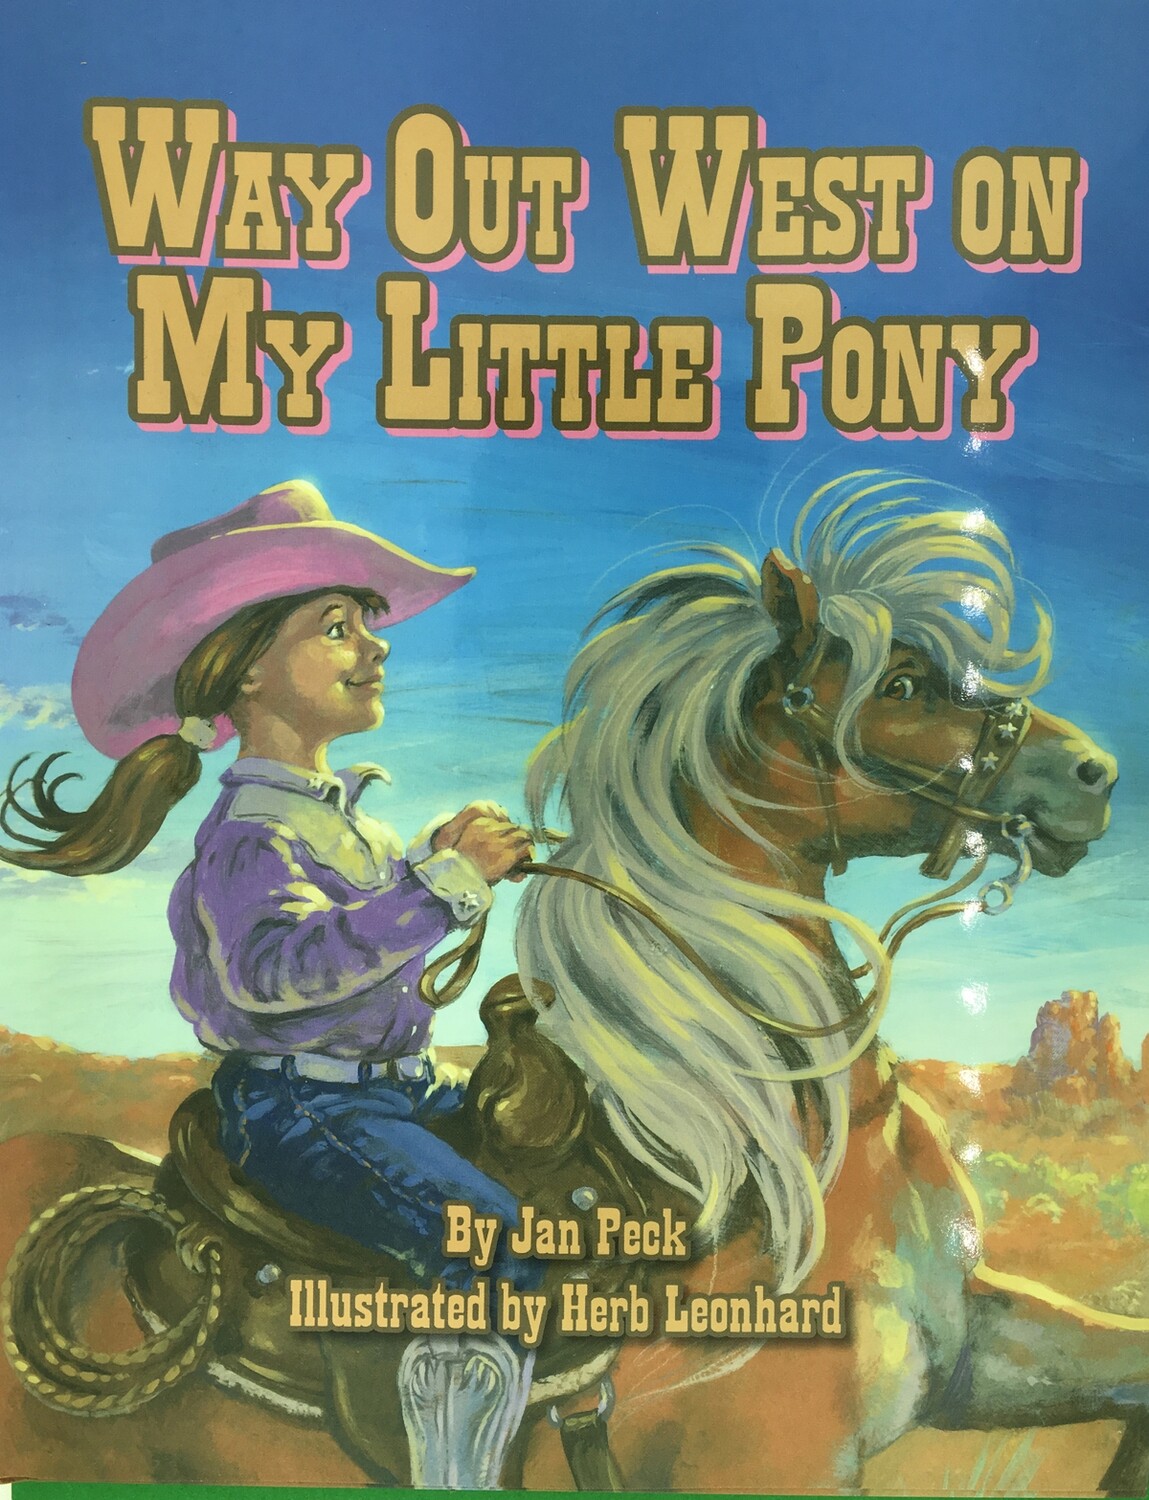 Way Out West On My Little Pony